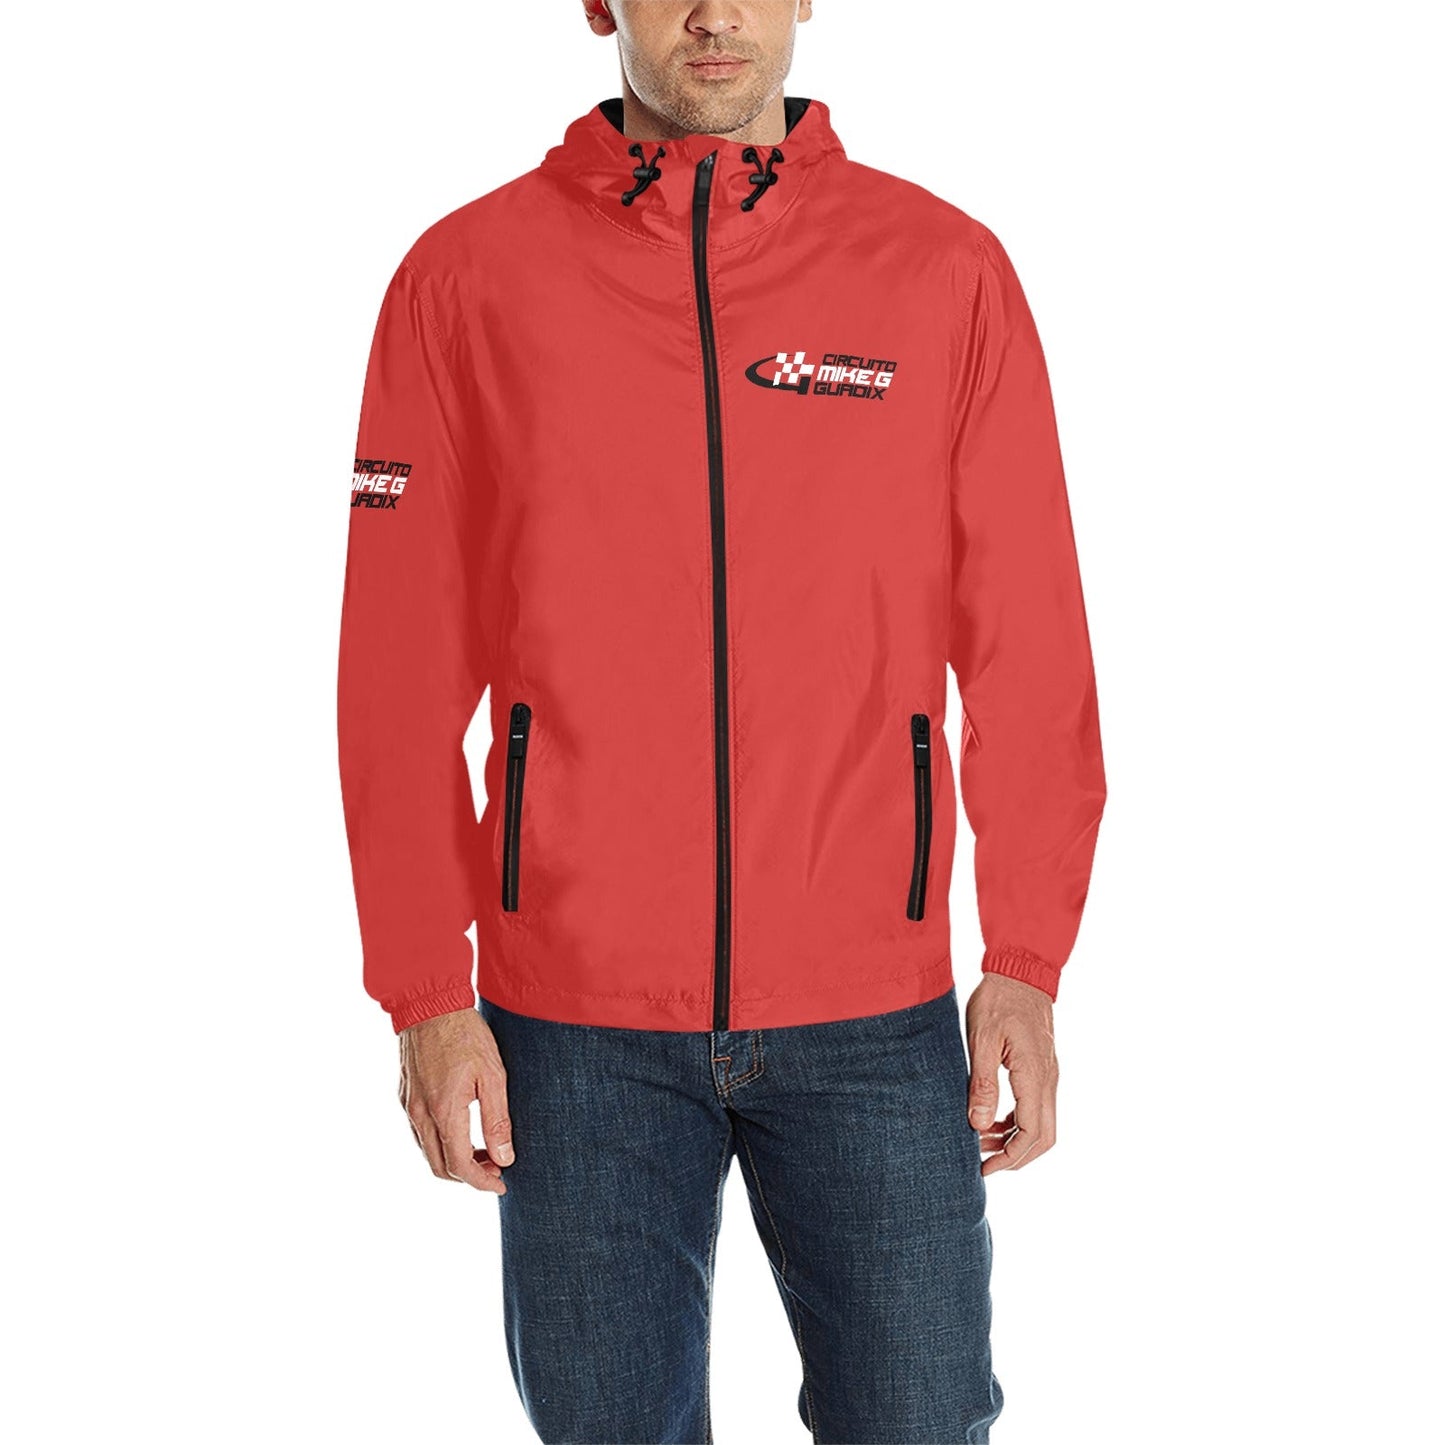 CIRCUITO MIKE G GUADIX Quilted Waterproof windbreaker jacket - red